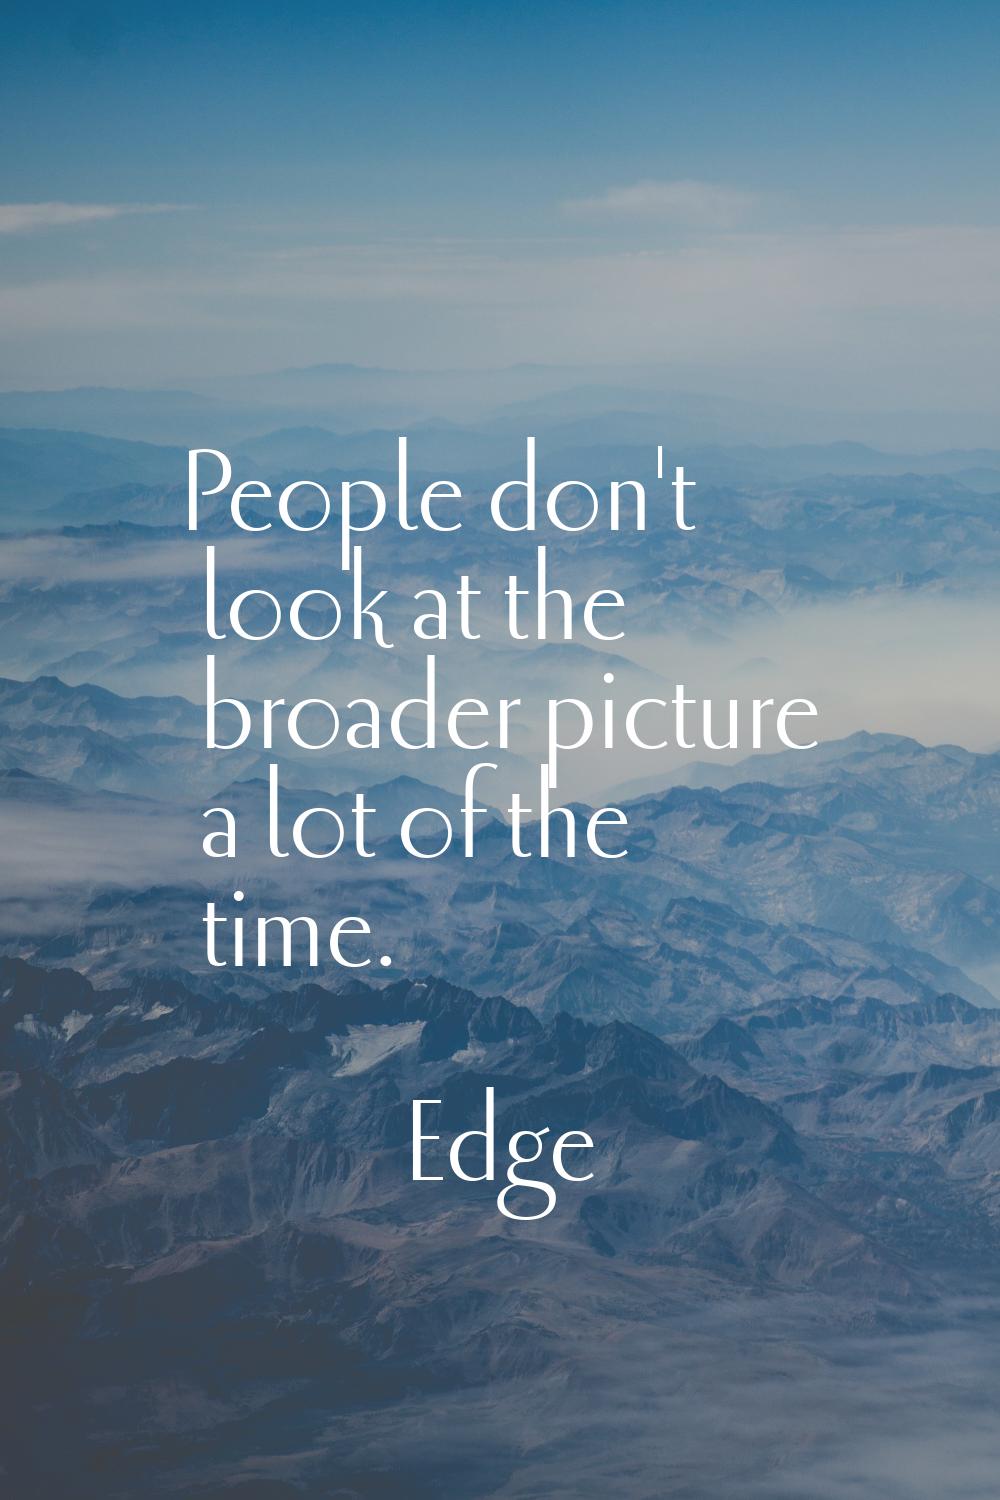 People don't look at the broader picture a lot of the time.